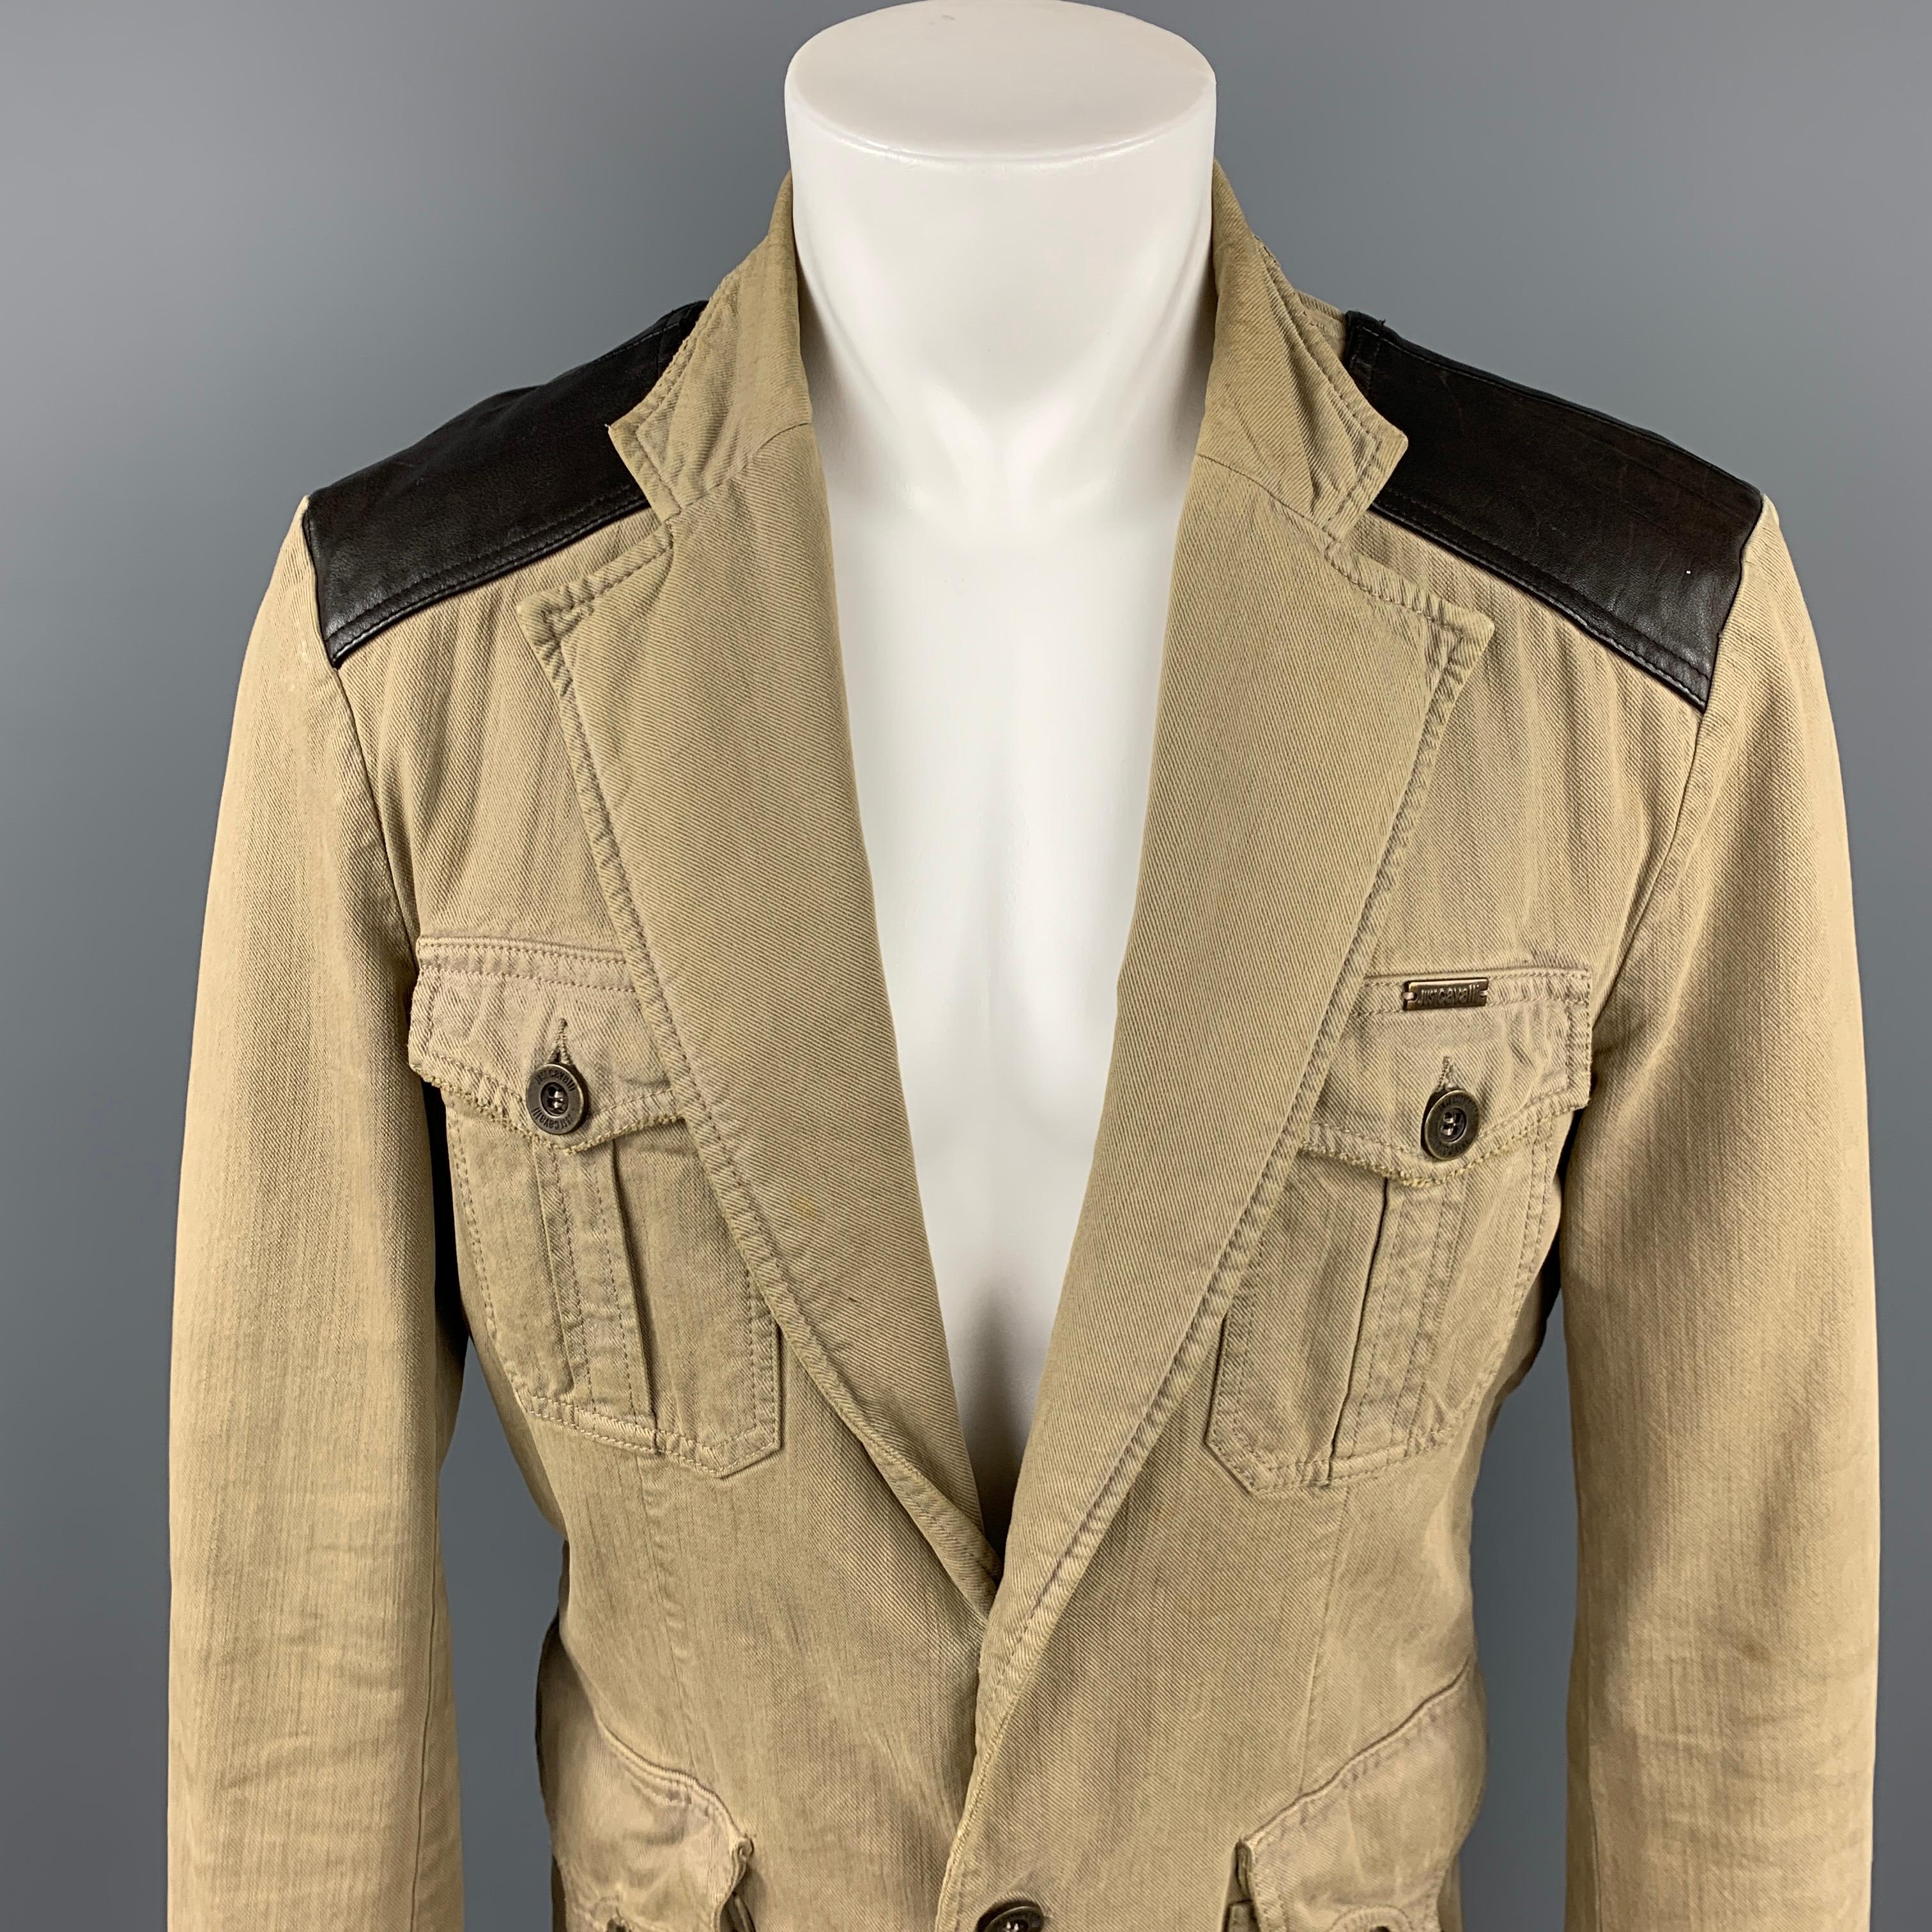 JUST CAVALLI jacket comes in khaki & brown cotton with a leather trim featuring a notch lapel, front pockets, strap detail, and a button closure. Moderate wear. Made in Italy. 

Good Pre-Owned Condition.
Marked: 52

Measurements:

Shoulder: 18.5